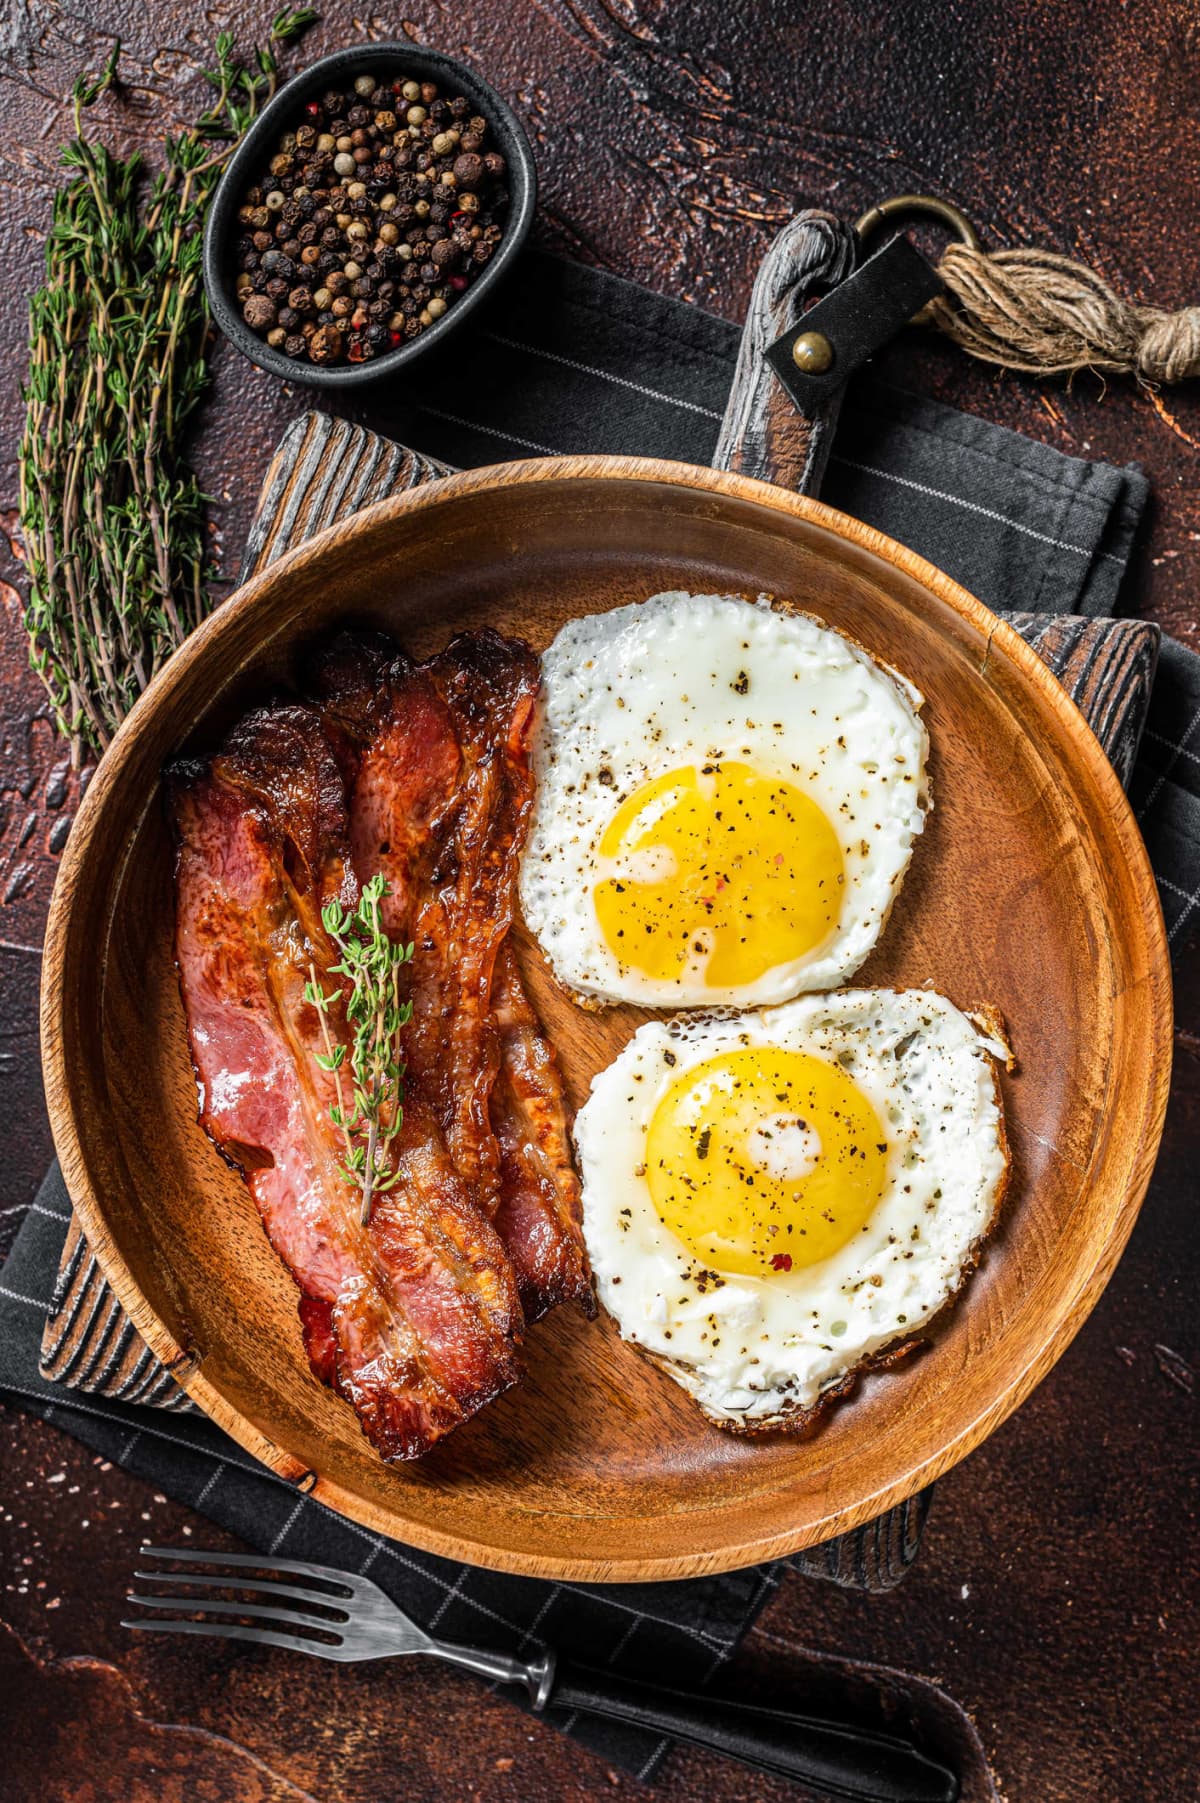 Fried eggs and bacon on a wooden plate